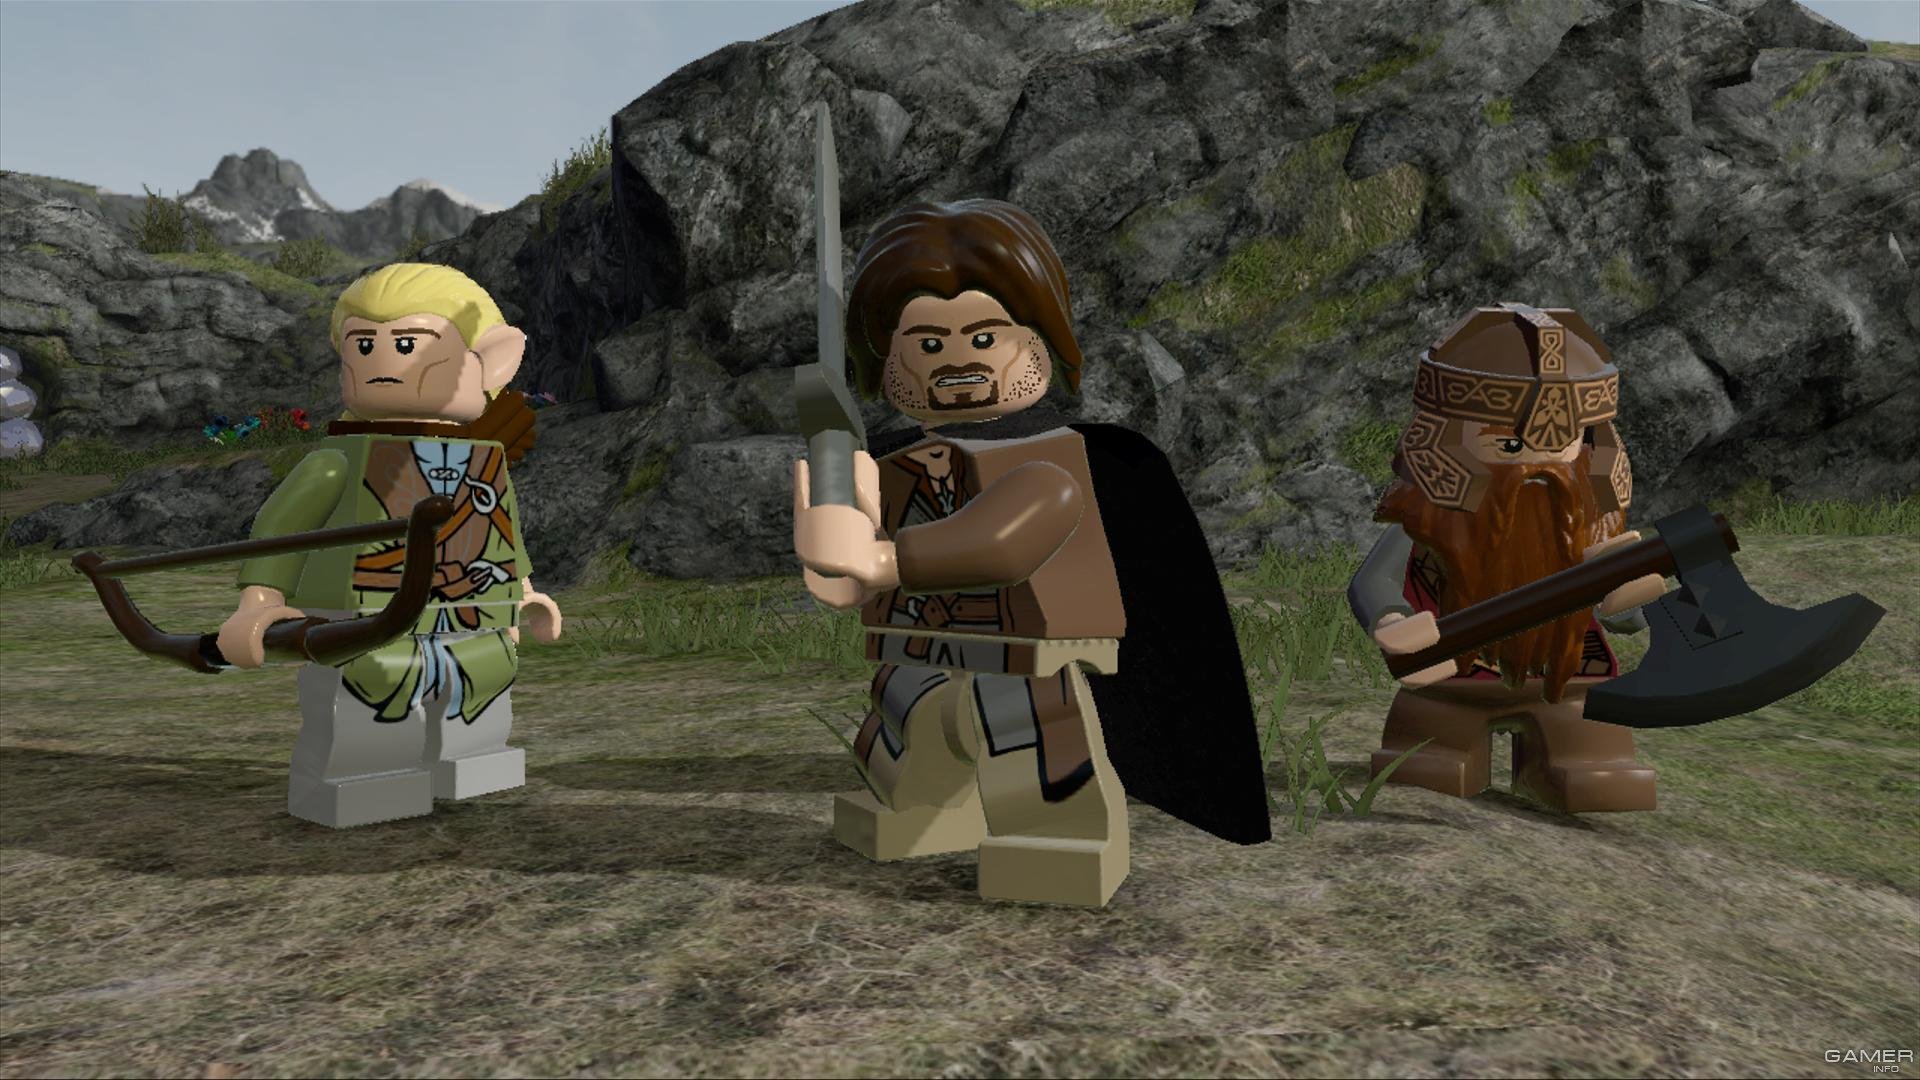 lego lord of the rings dlc for ps3